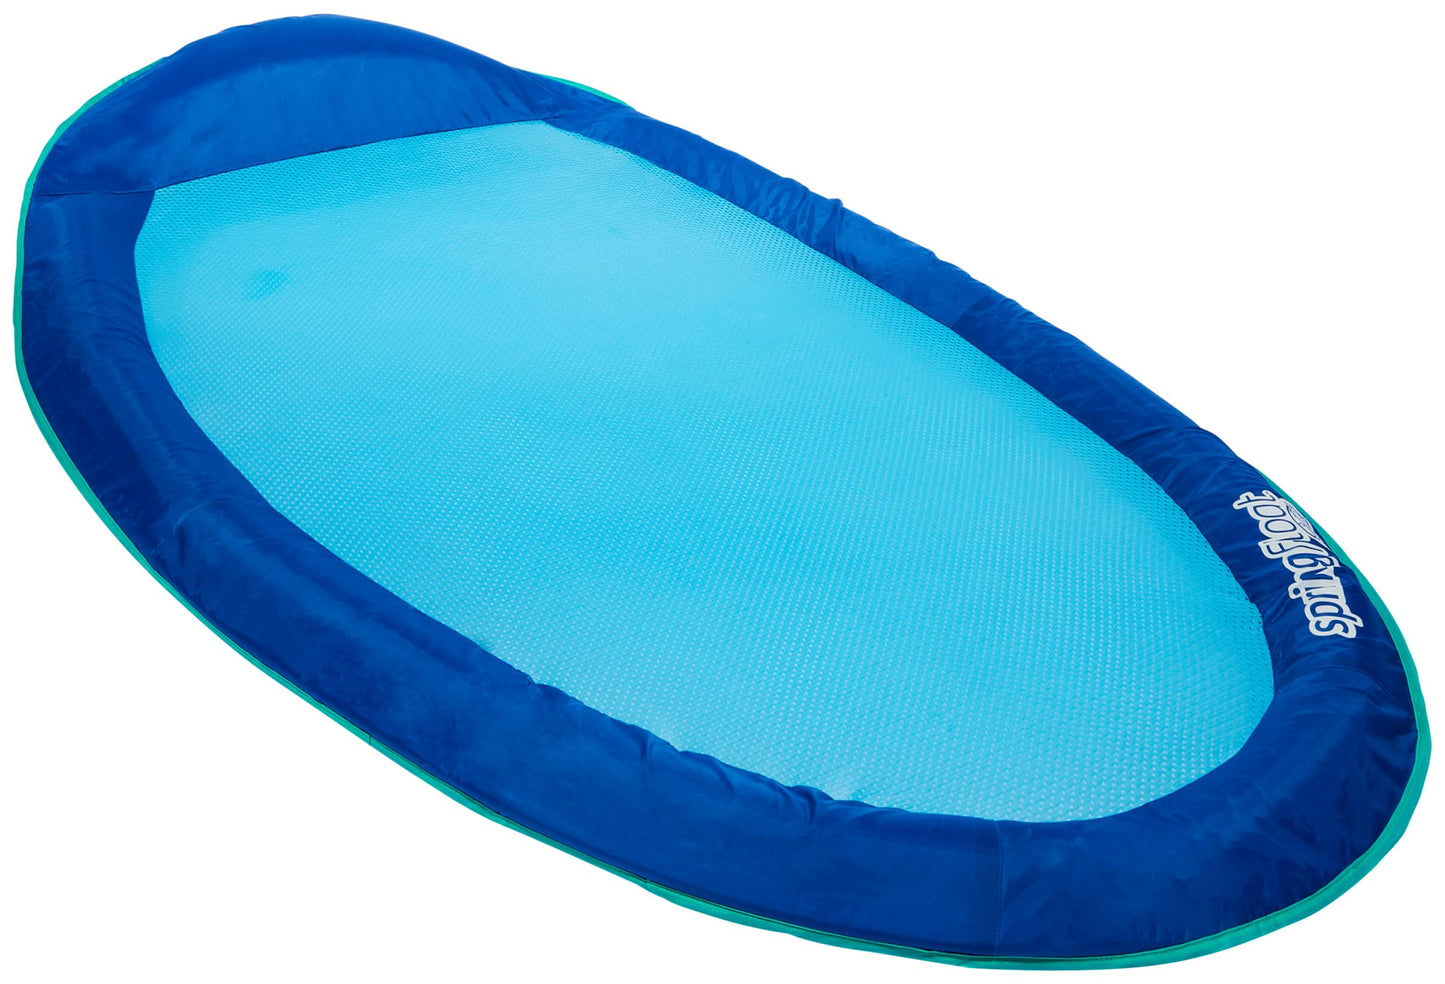 SwimWays Spring Float Original Pool Lounge Chair with Hyper-Flate Valve, Blue